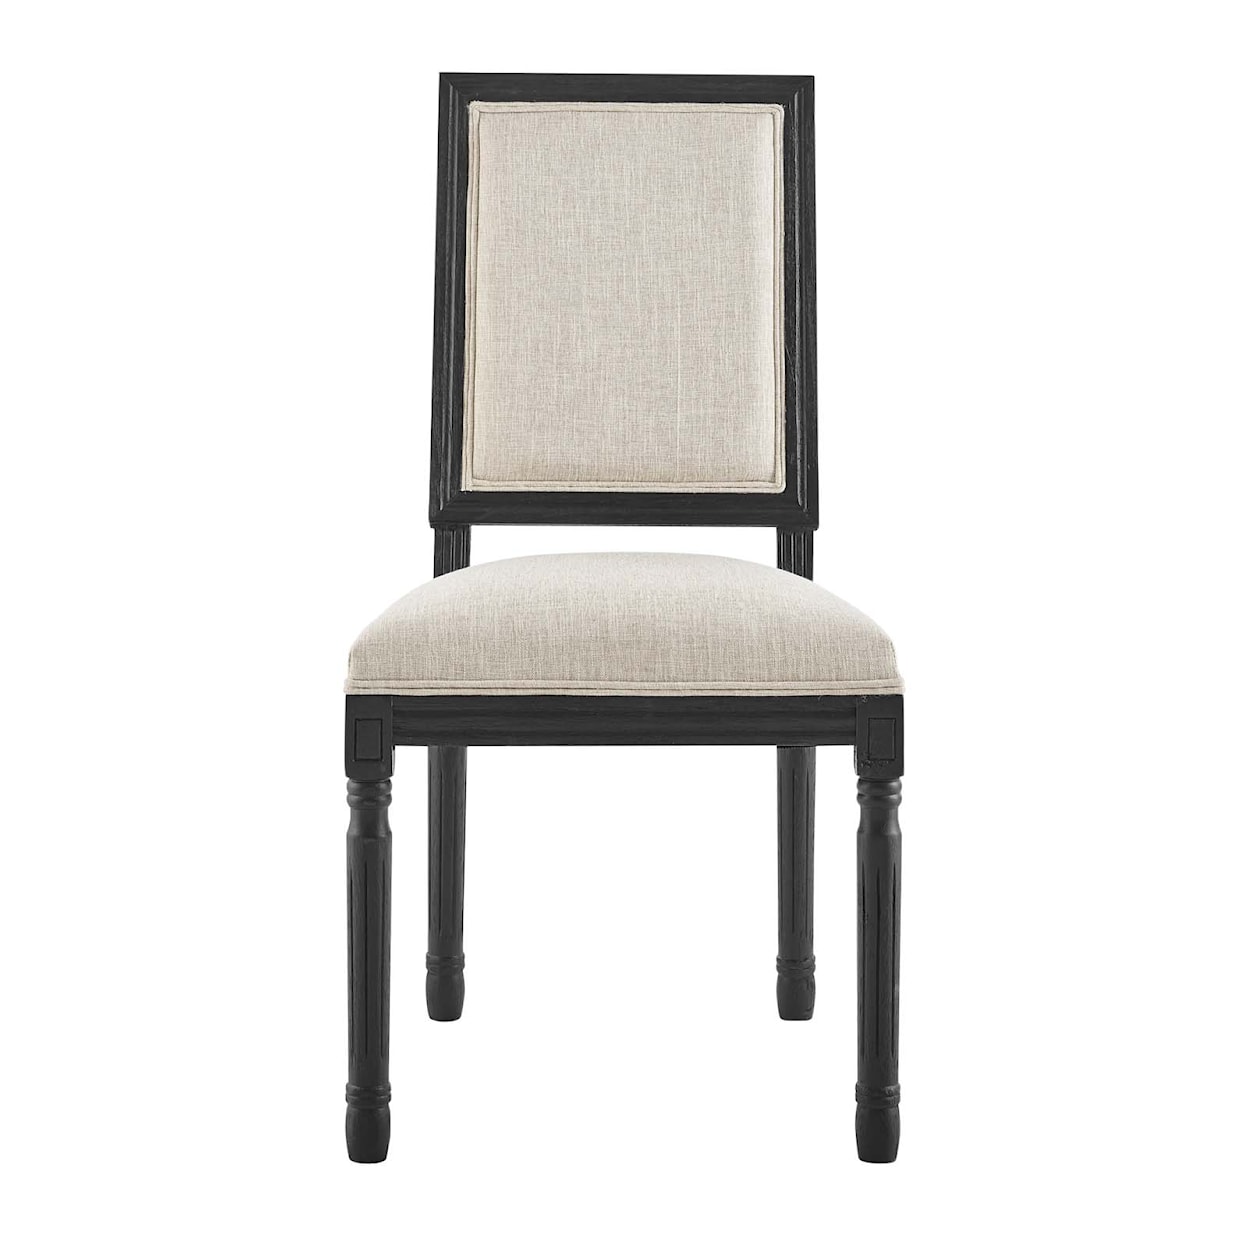 Modway Court Dining Side Chair